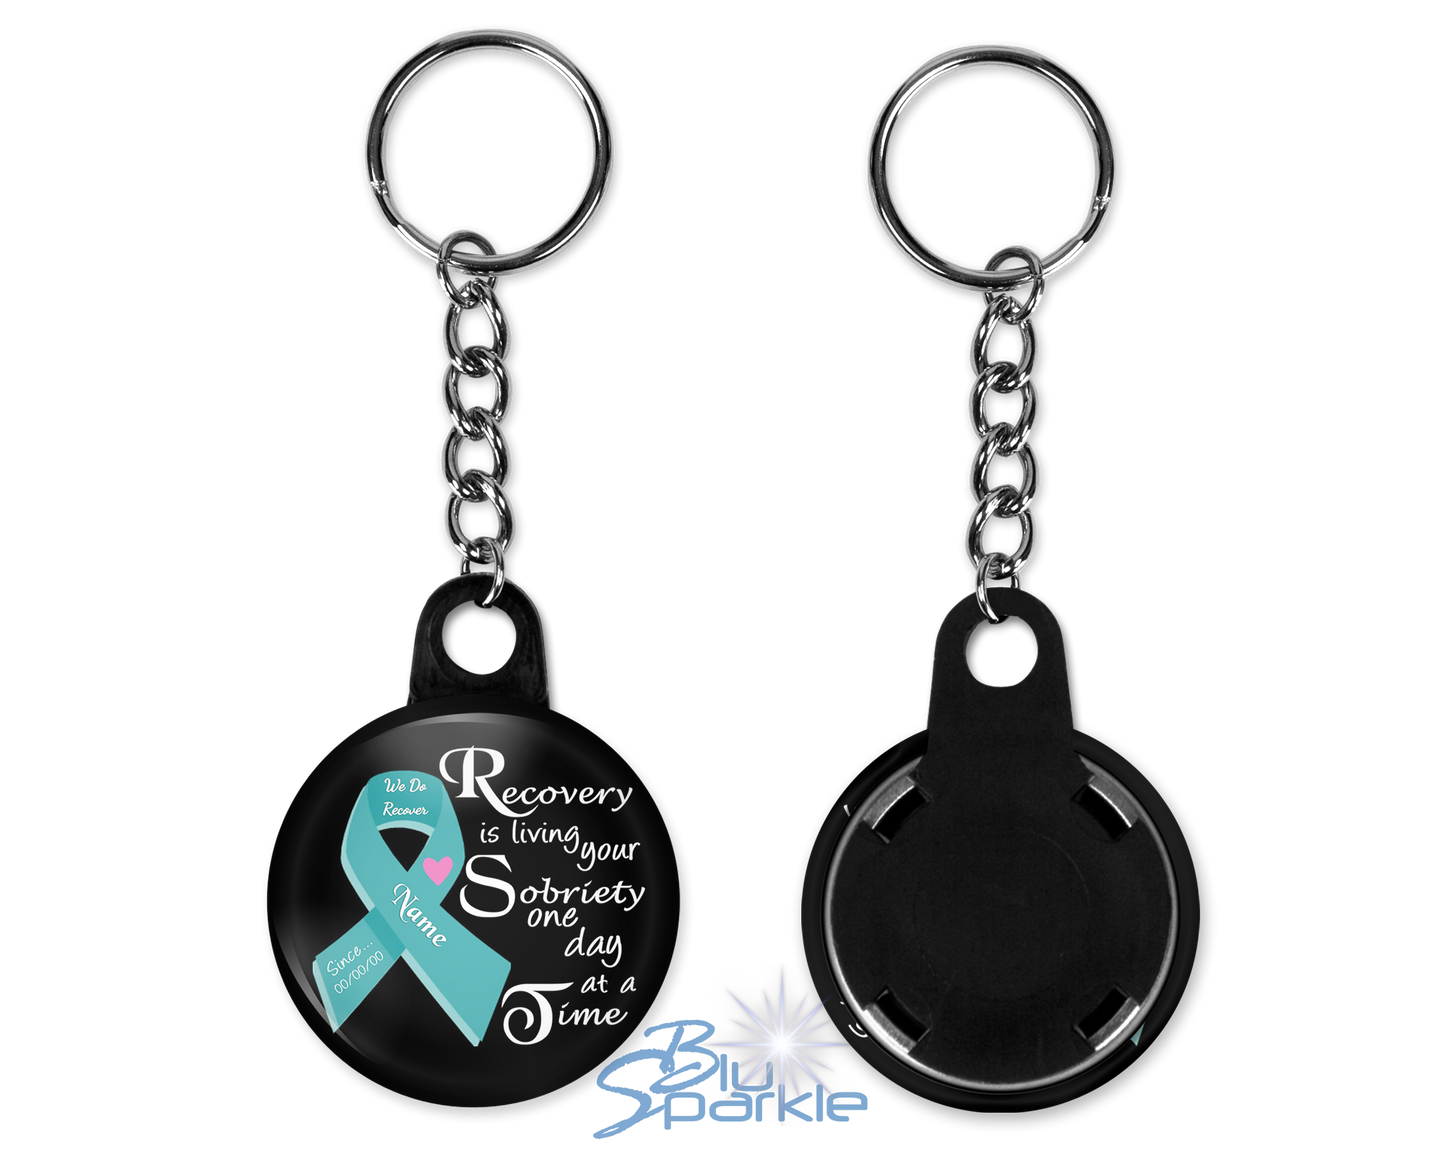 Personalized "Recovery is Living Your Sobriety One Day at a Time" Key Chains